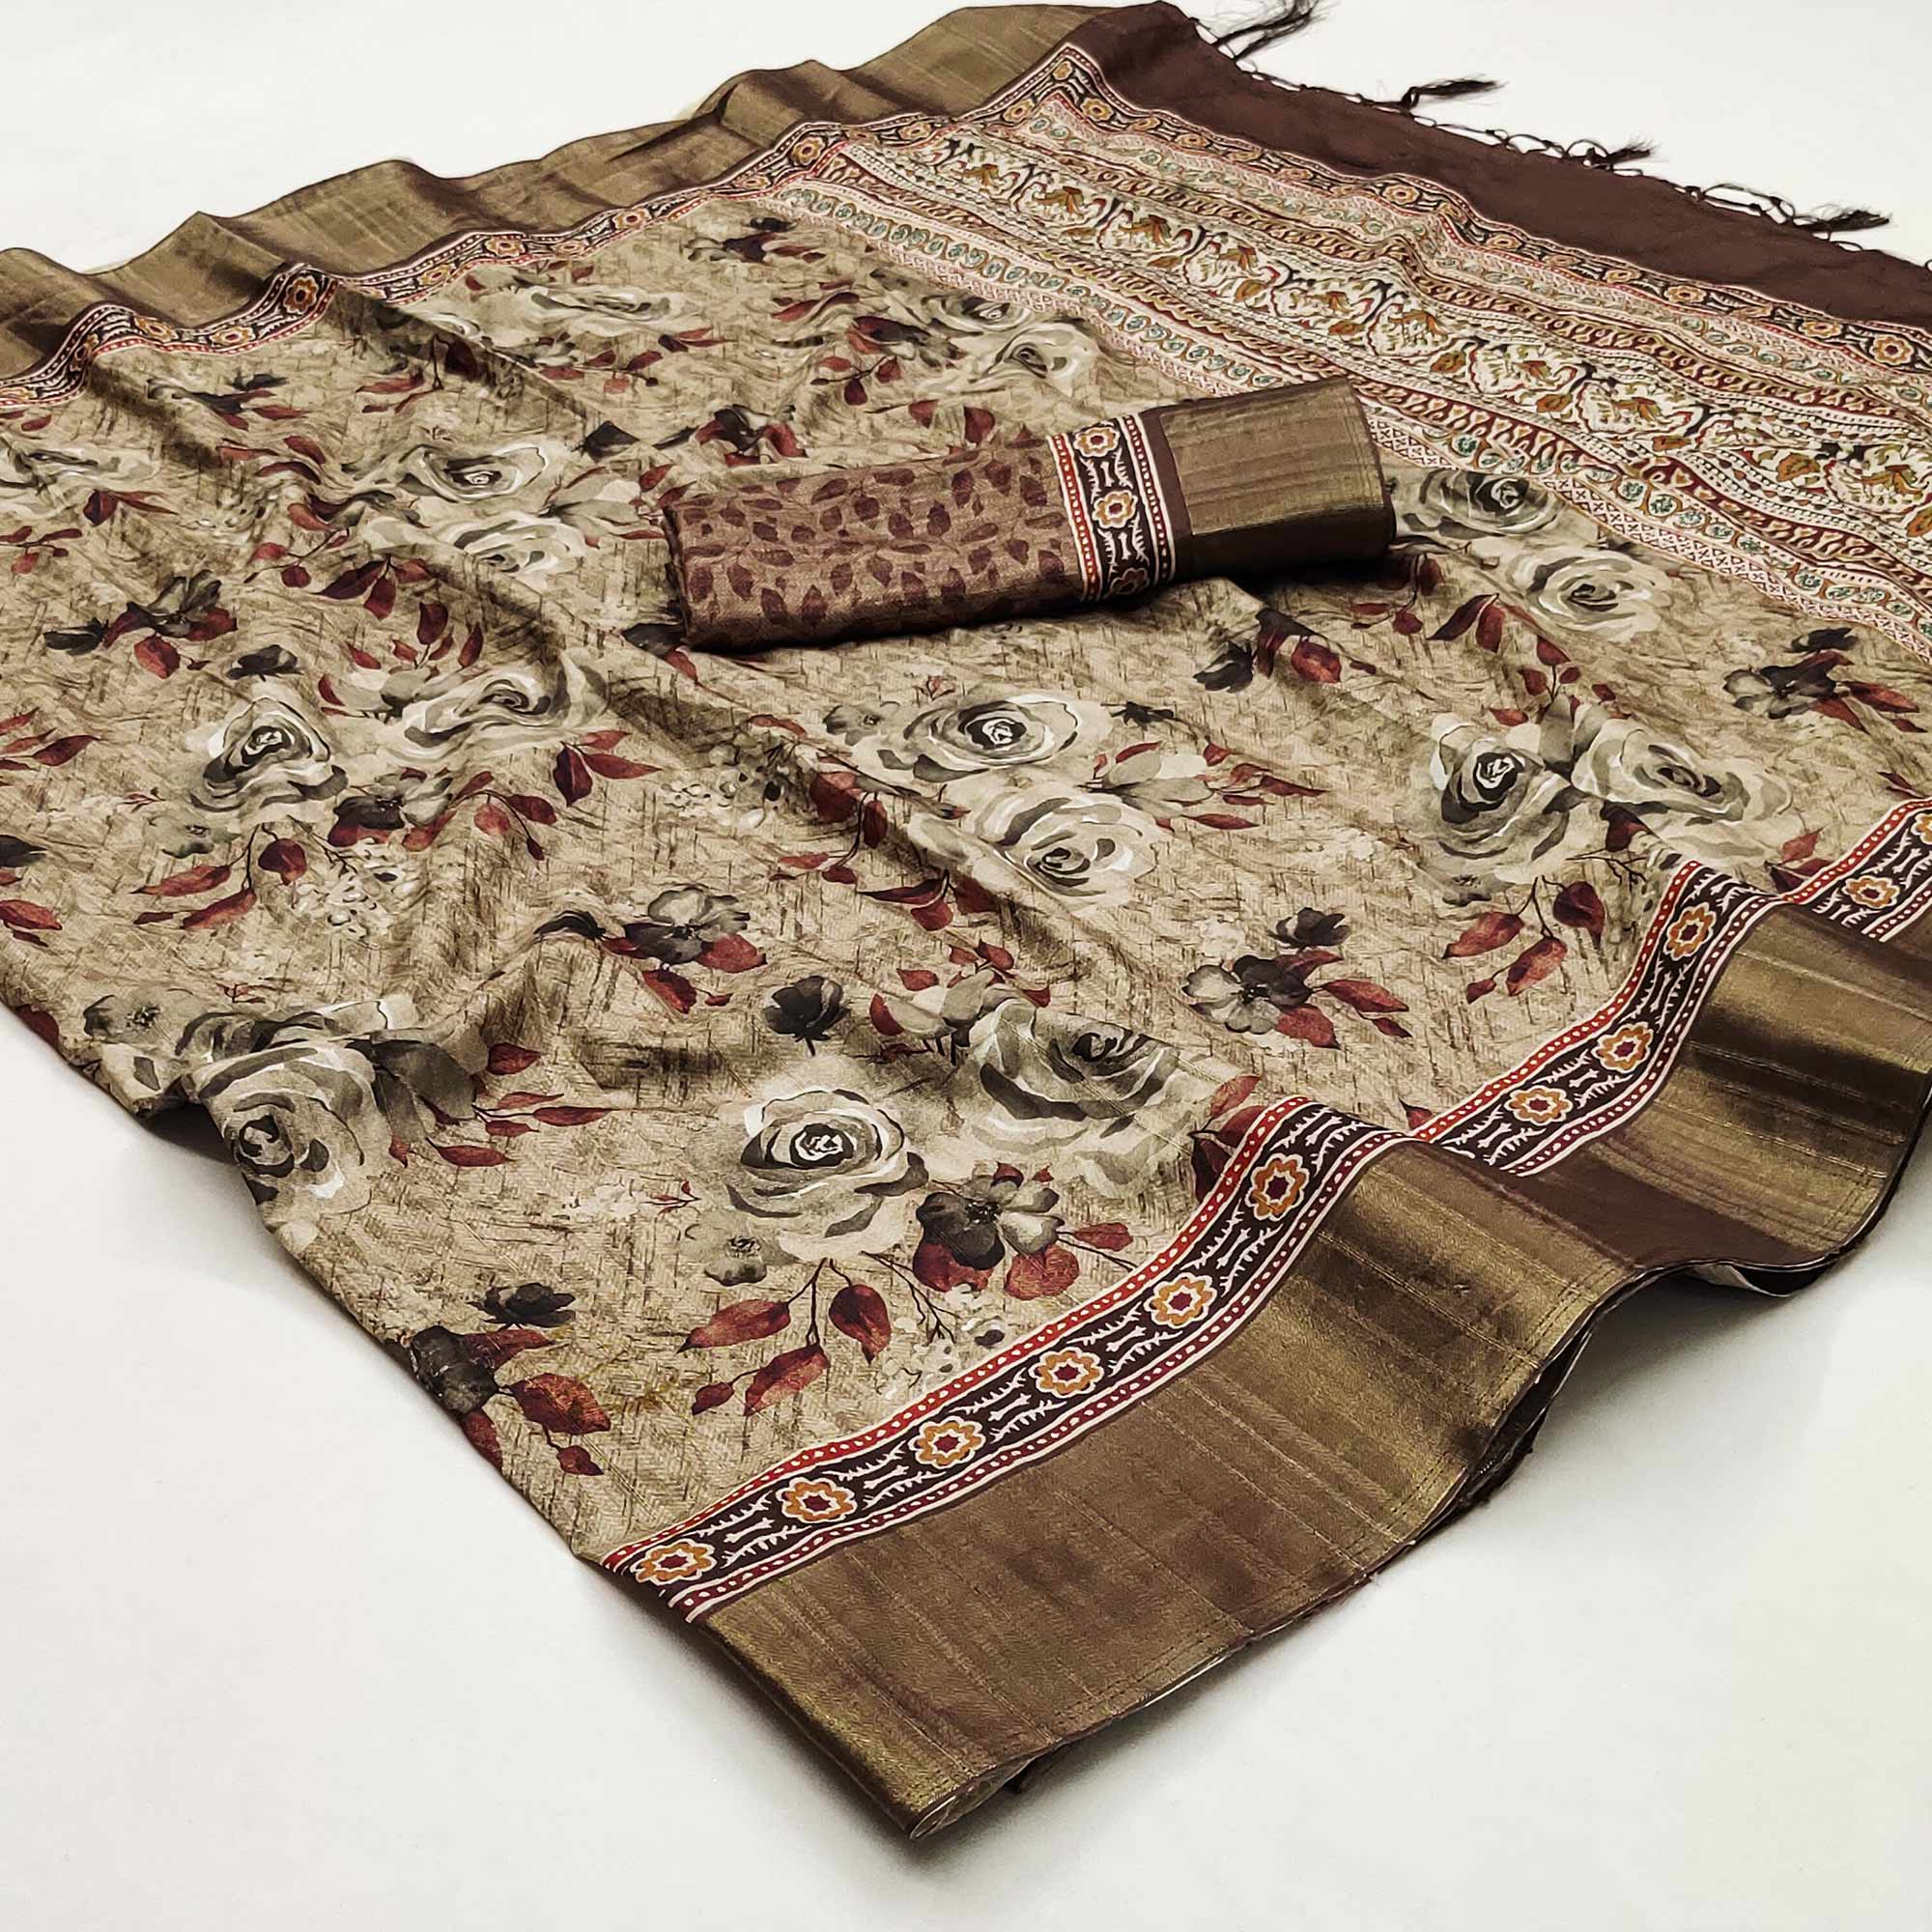 Light Brown Floral Printed Matka Tussar Saree With Tassels